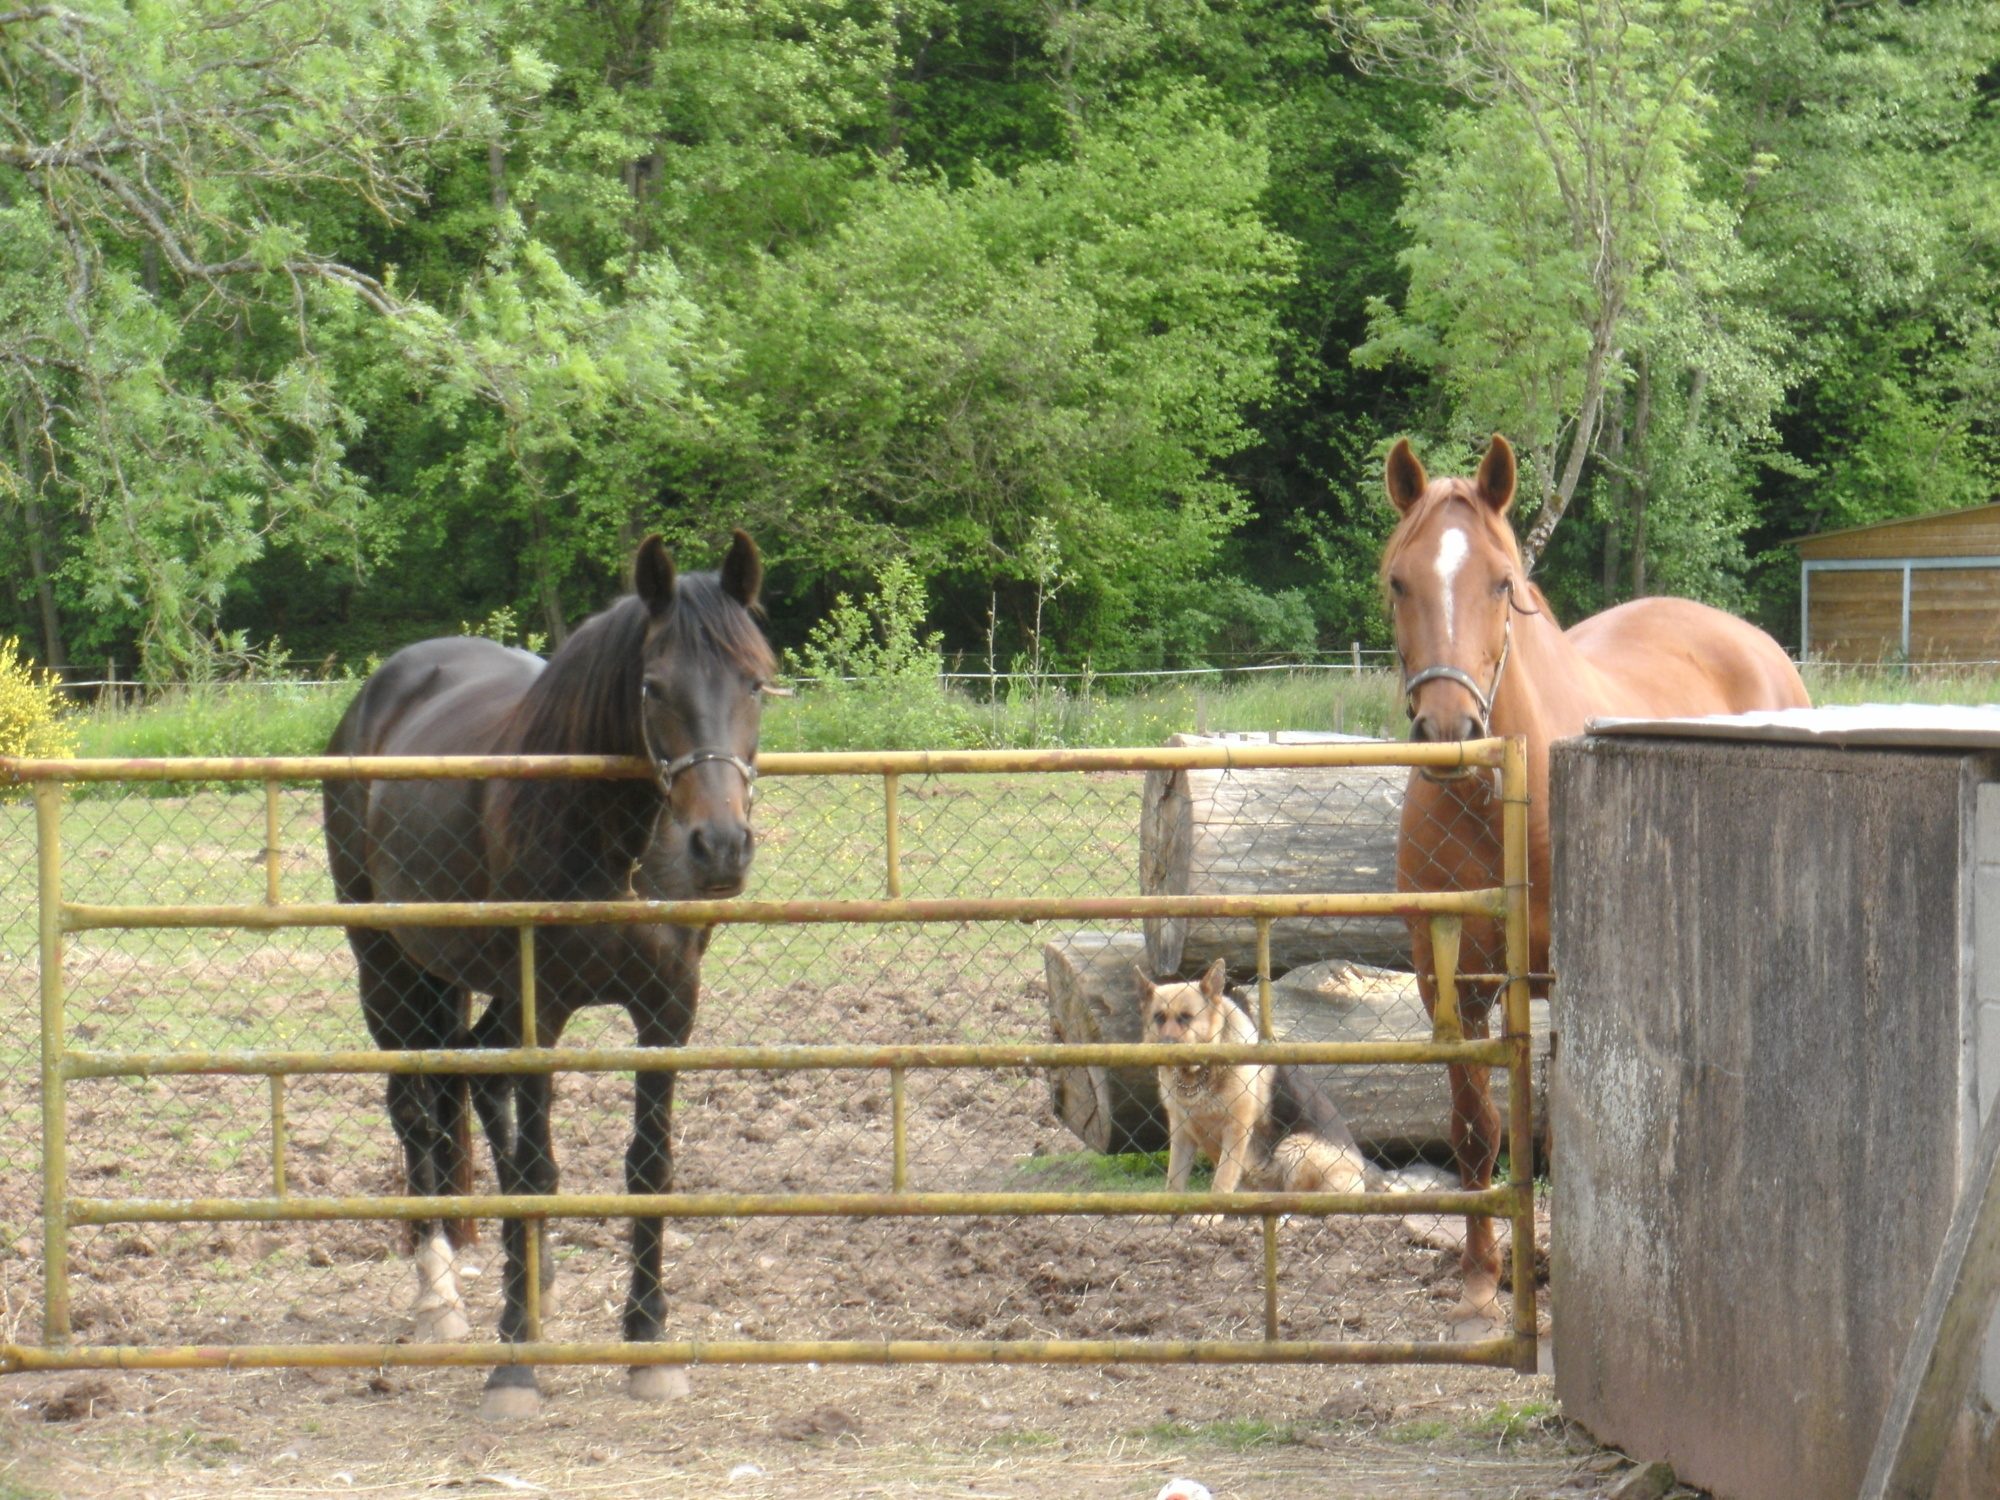 Kiola ( bay mare ) and Number One ( chestnut gelding ) posing with Brindille (GSD Mum of the three girls )